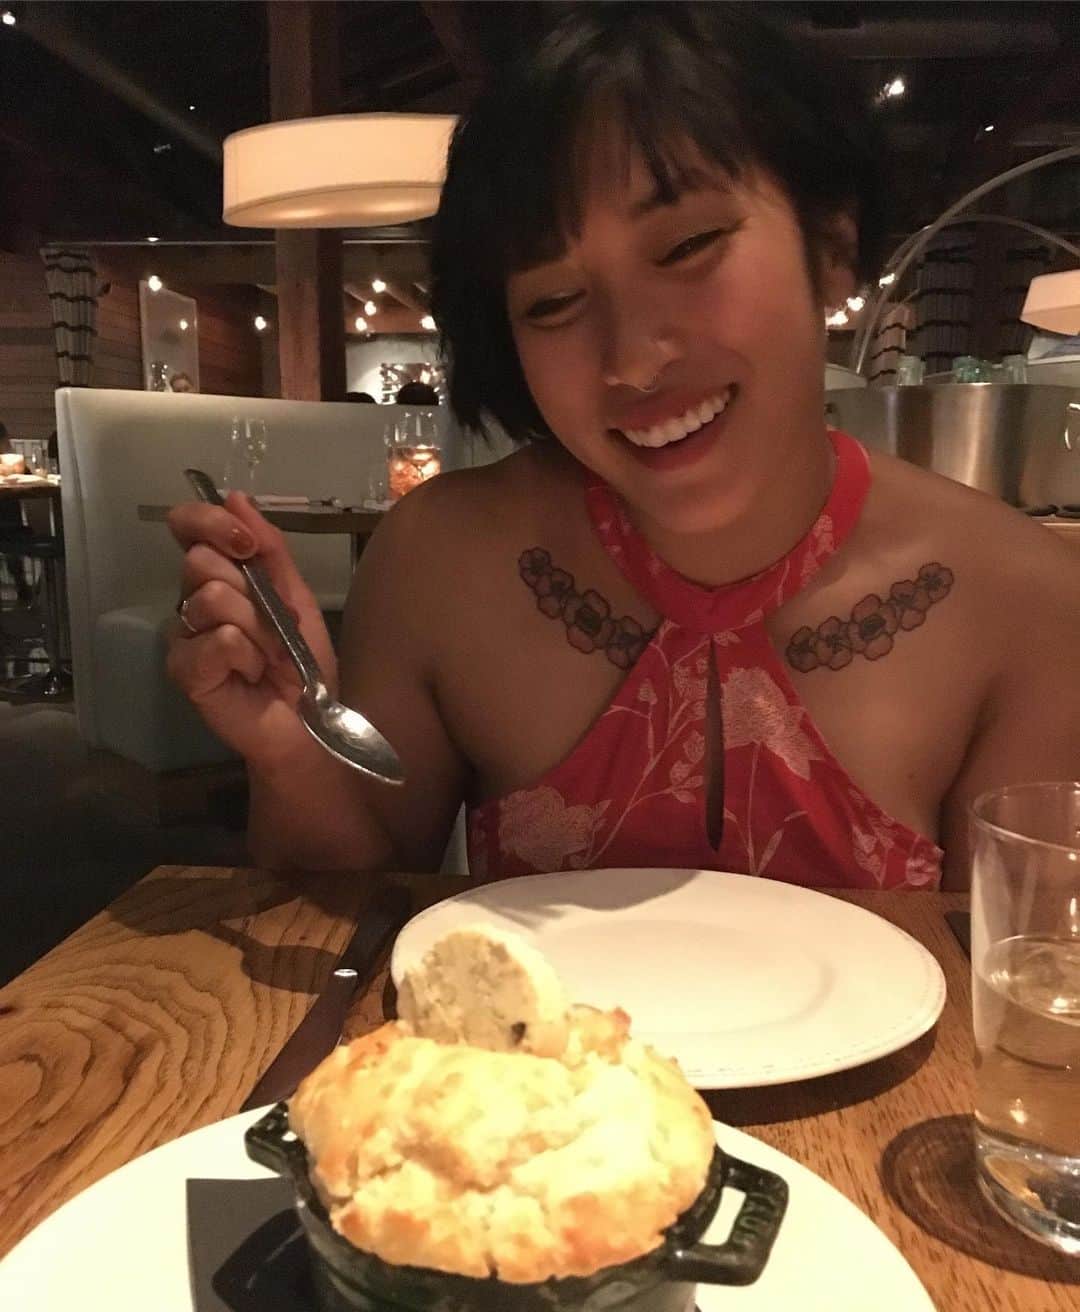 Mia Littleのインスタグラム：「Captured by my best friend. [photo description: Mia looking longingly with a hand holding a raised spoon at a biscuit in a mini cast iron pot topped with a disk of butter. Mia is wearing a red halter type dress that is red with a white floral pattern. The picture is dimly lit and there are restaurant lights and seating in the background.]」